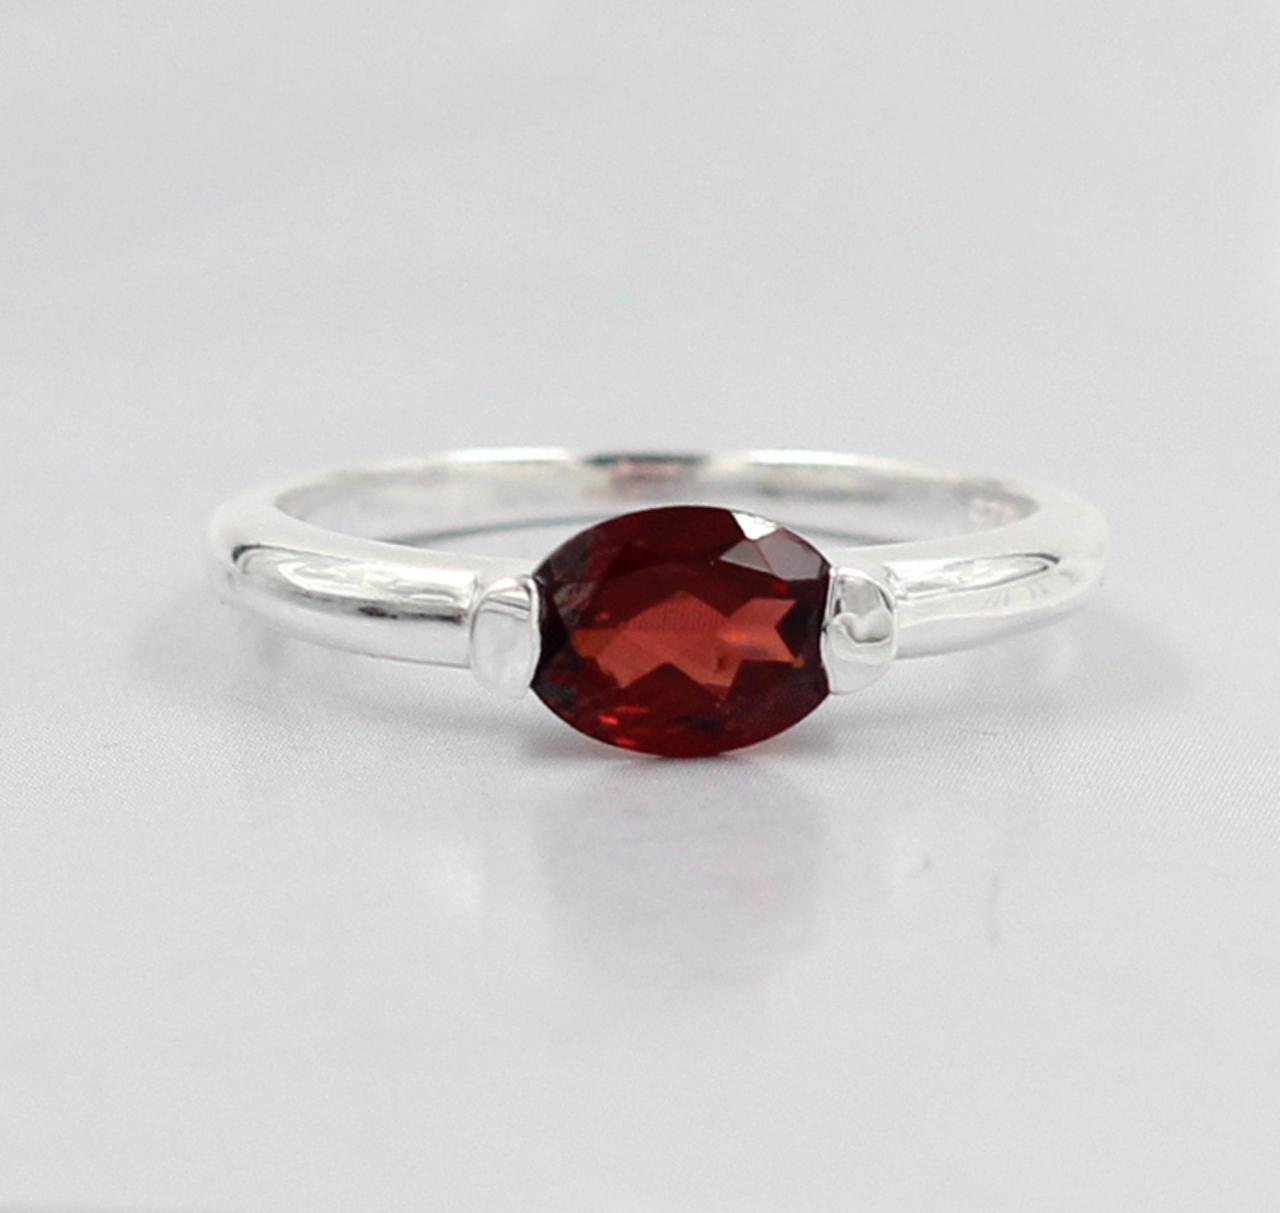 Sparkling Natural Red Garnet Ring,solid 925 Sterling Silver Gemstone Jewelry,proposal Ring,anniversary Present,birthstone Ring,ring For Me